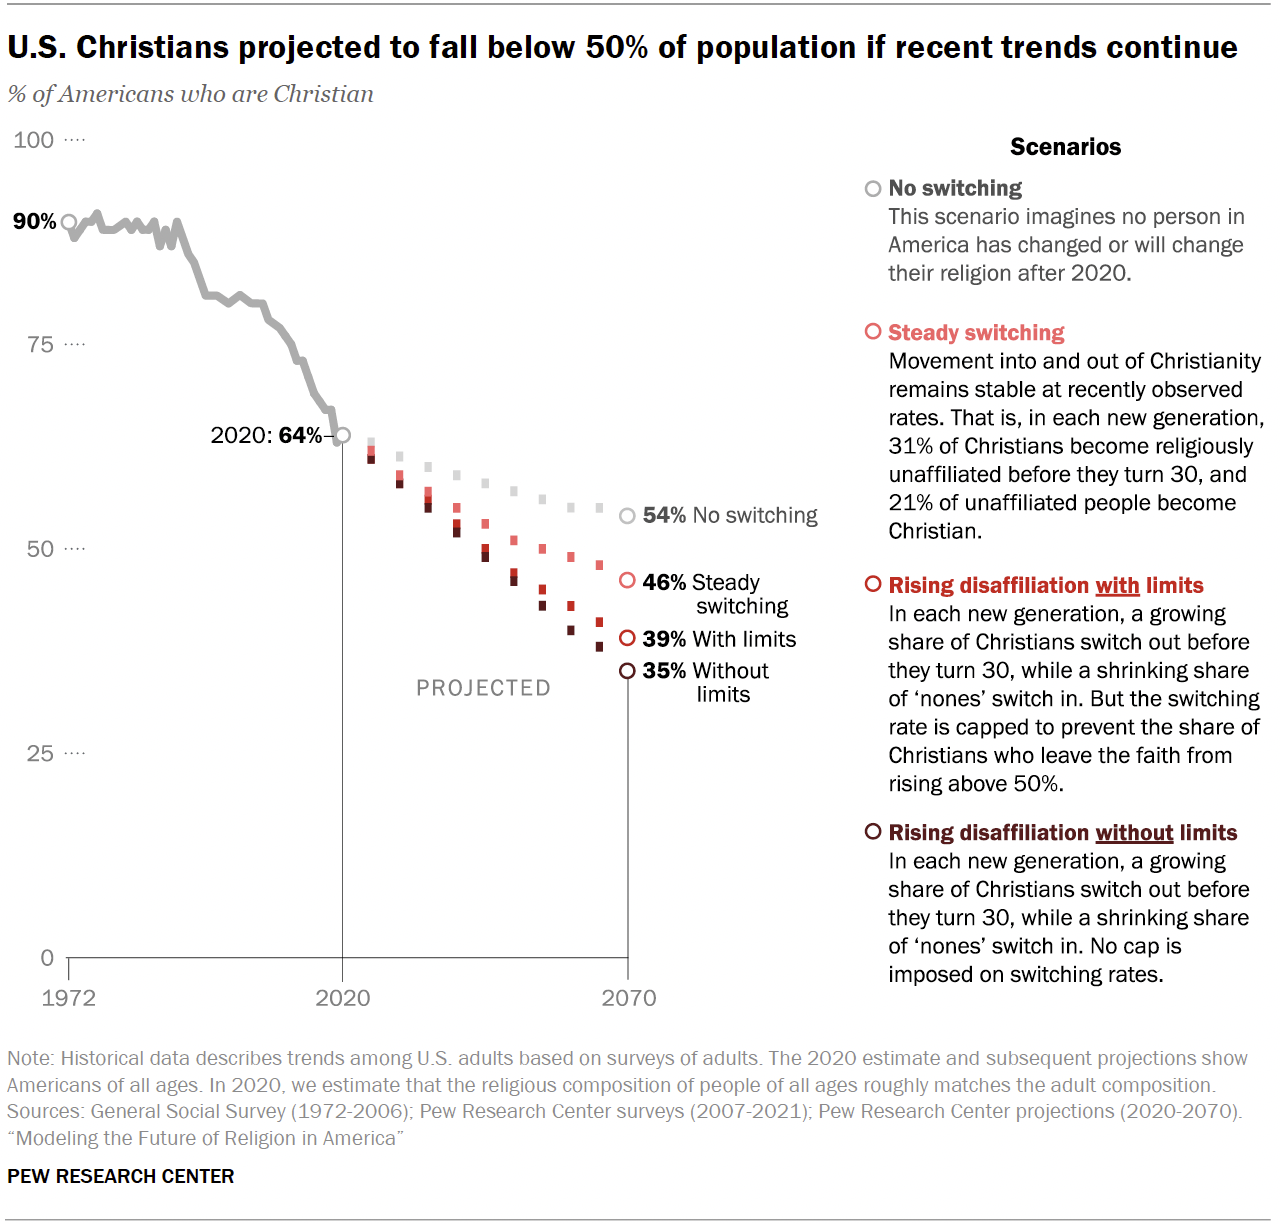 The share of people who identify as Christian in the US is projected to decrease in all scenarios modelled by the Pew Research Center